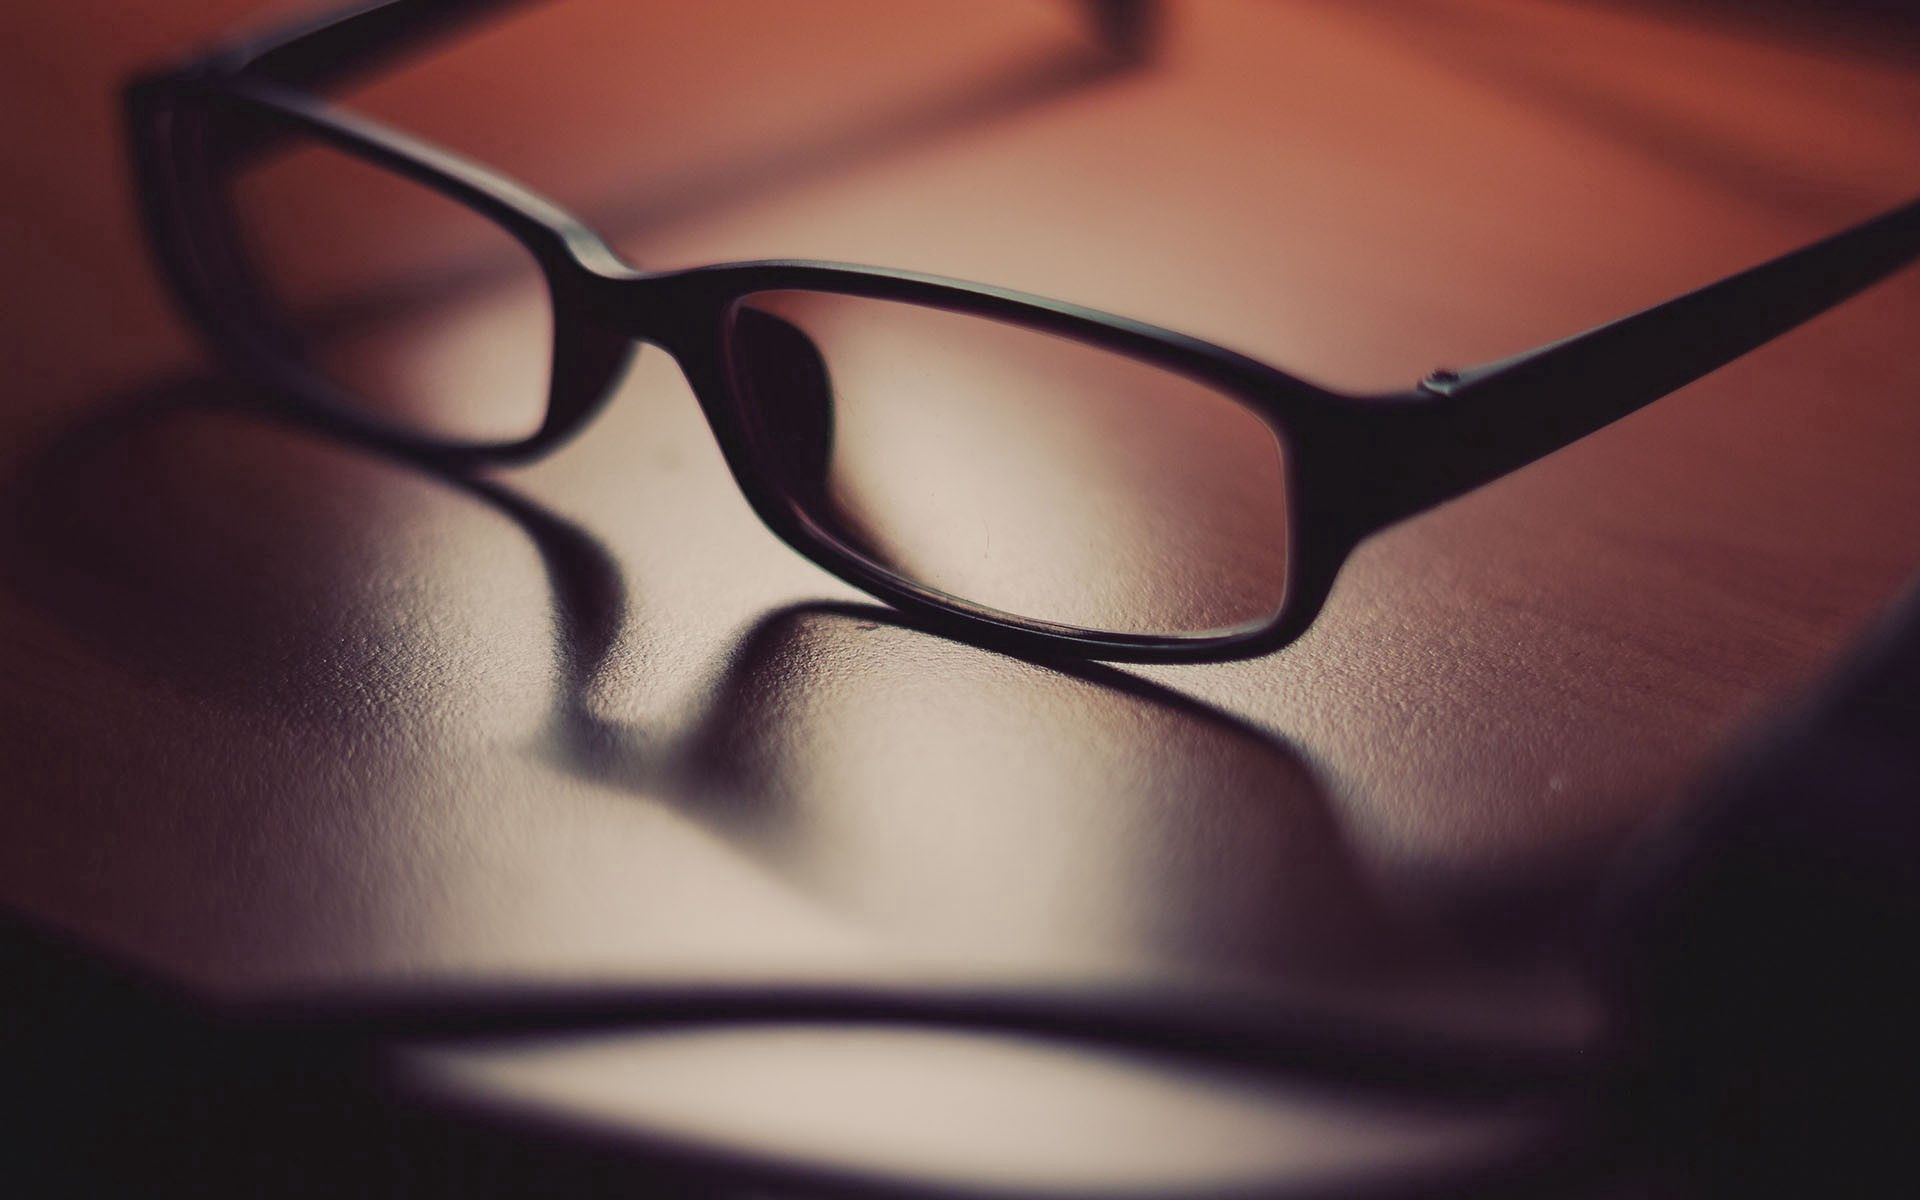 spectacles, miscellanea, miscellaneous, surface, shadow, glass, lenses, glasses, frame, setting